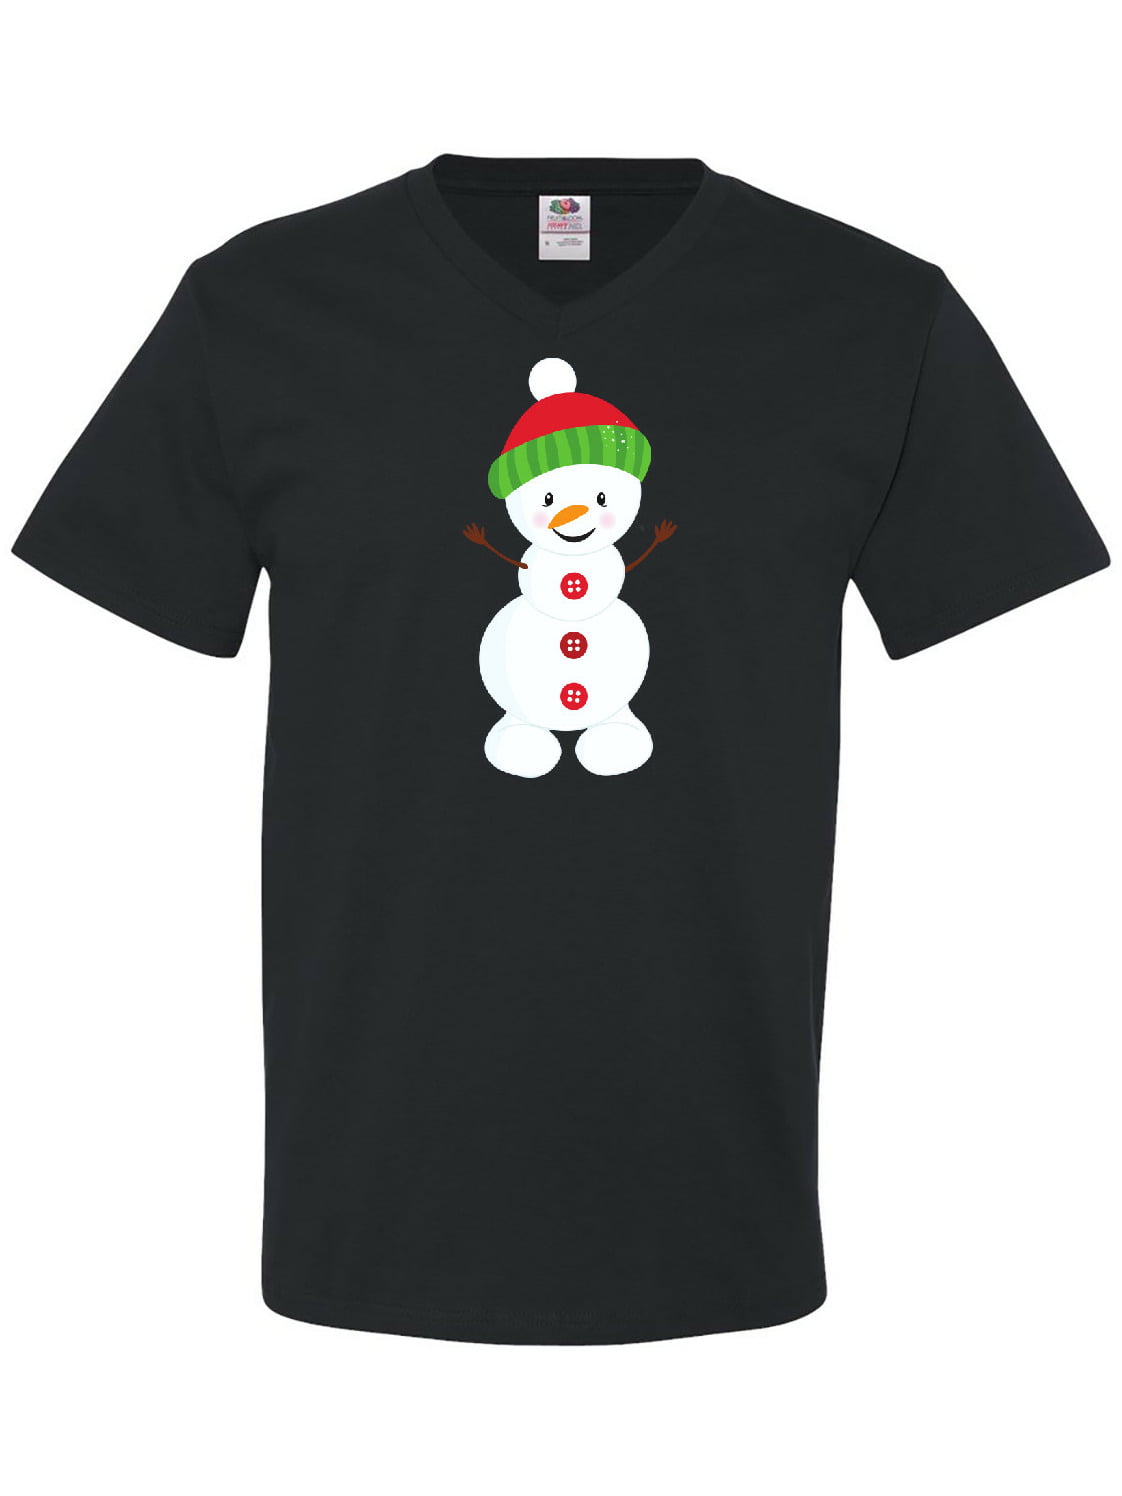 Smiling Snowman with Button Eyes Unisex Tank Top